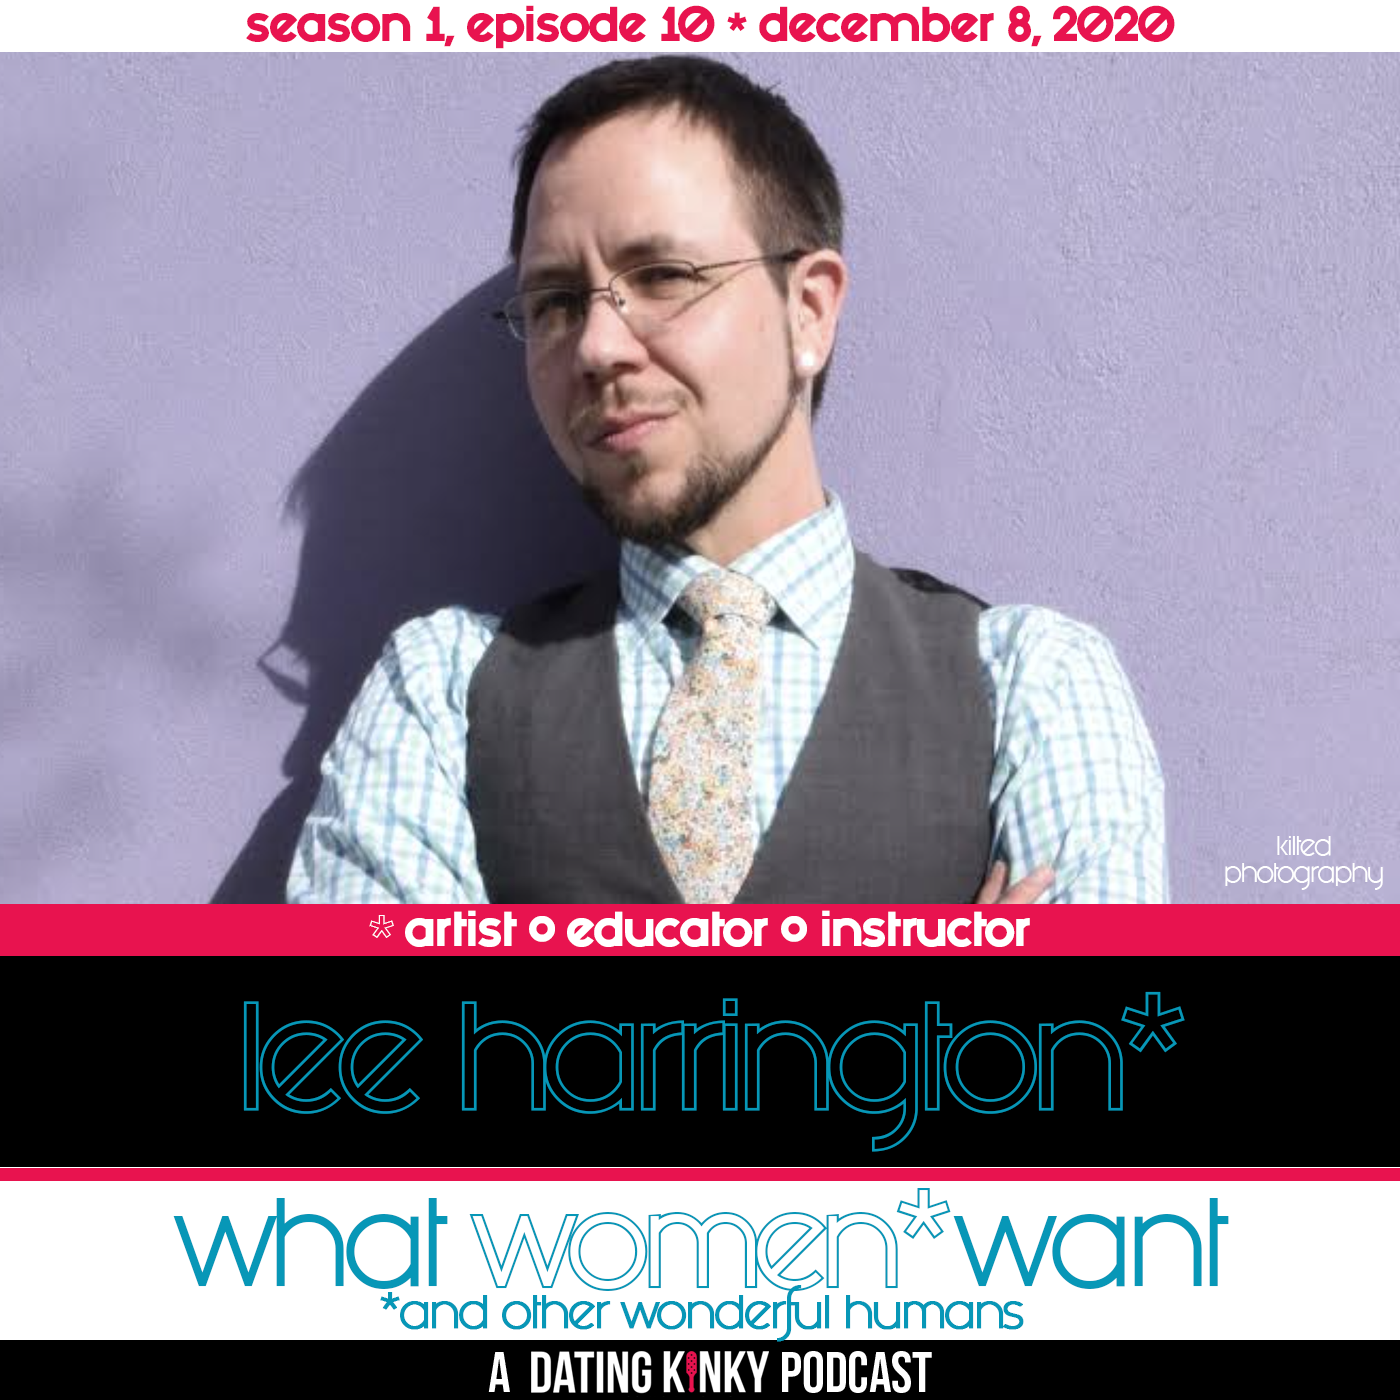 An Education and More with Lee Harrington